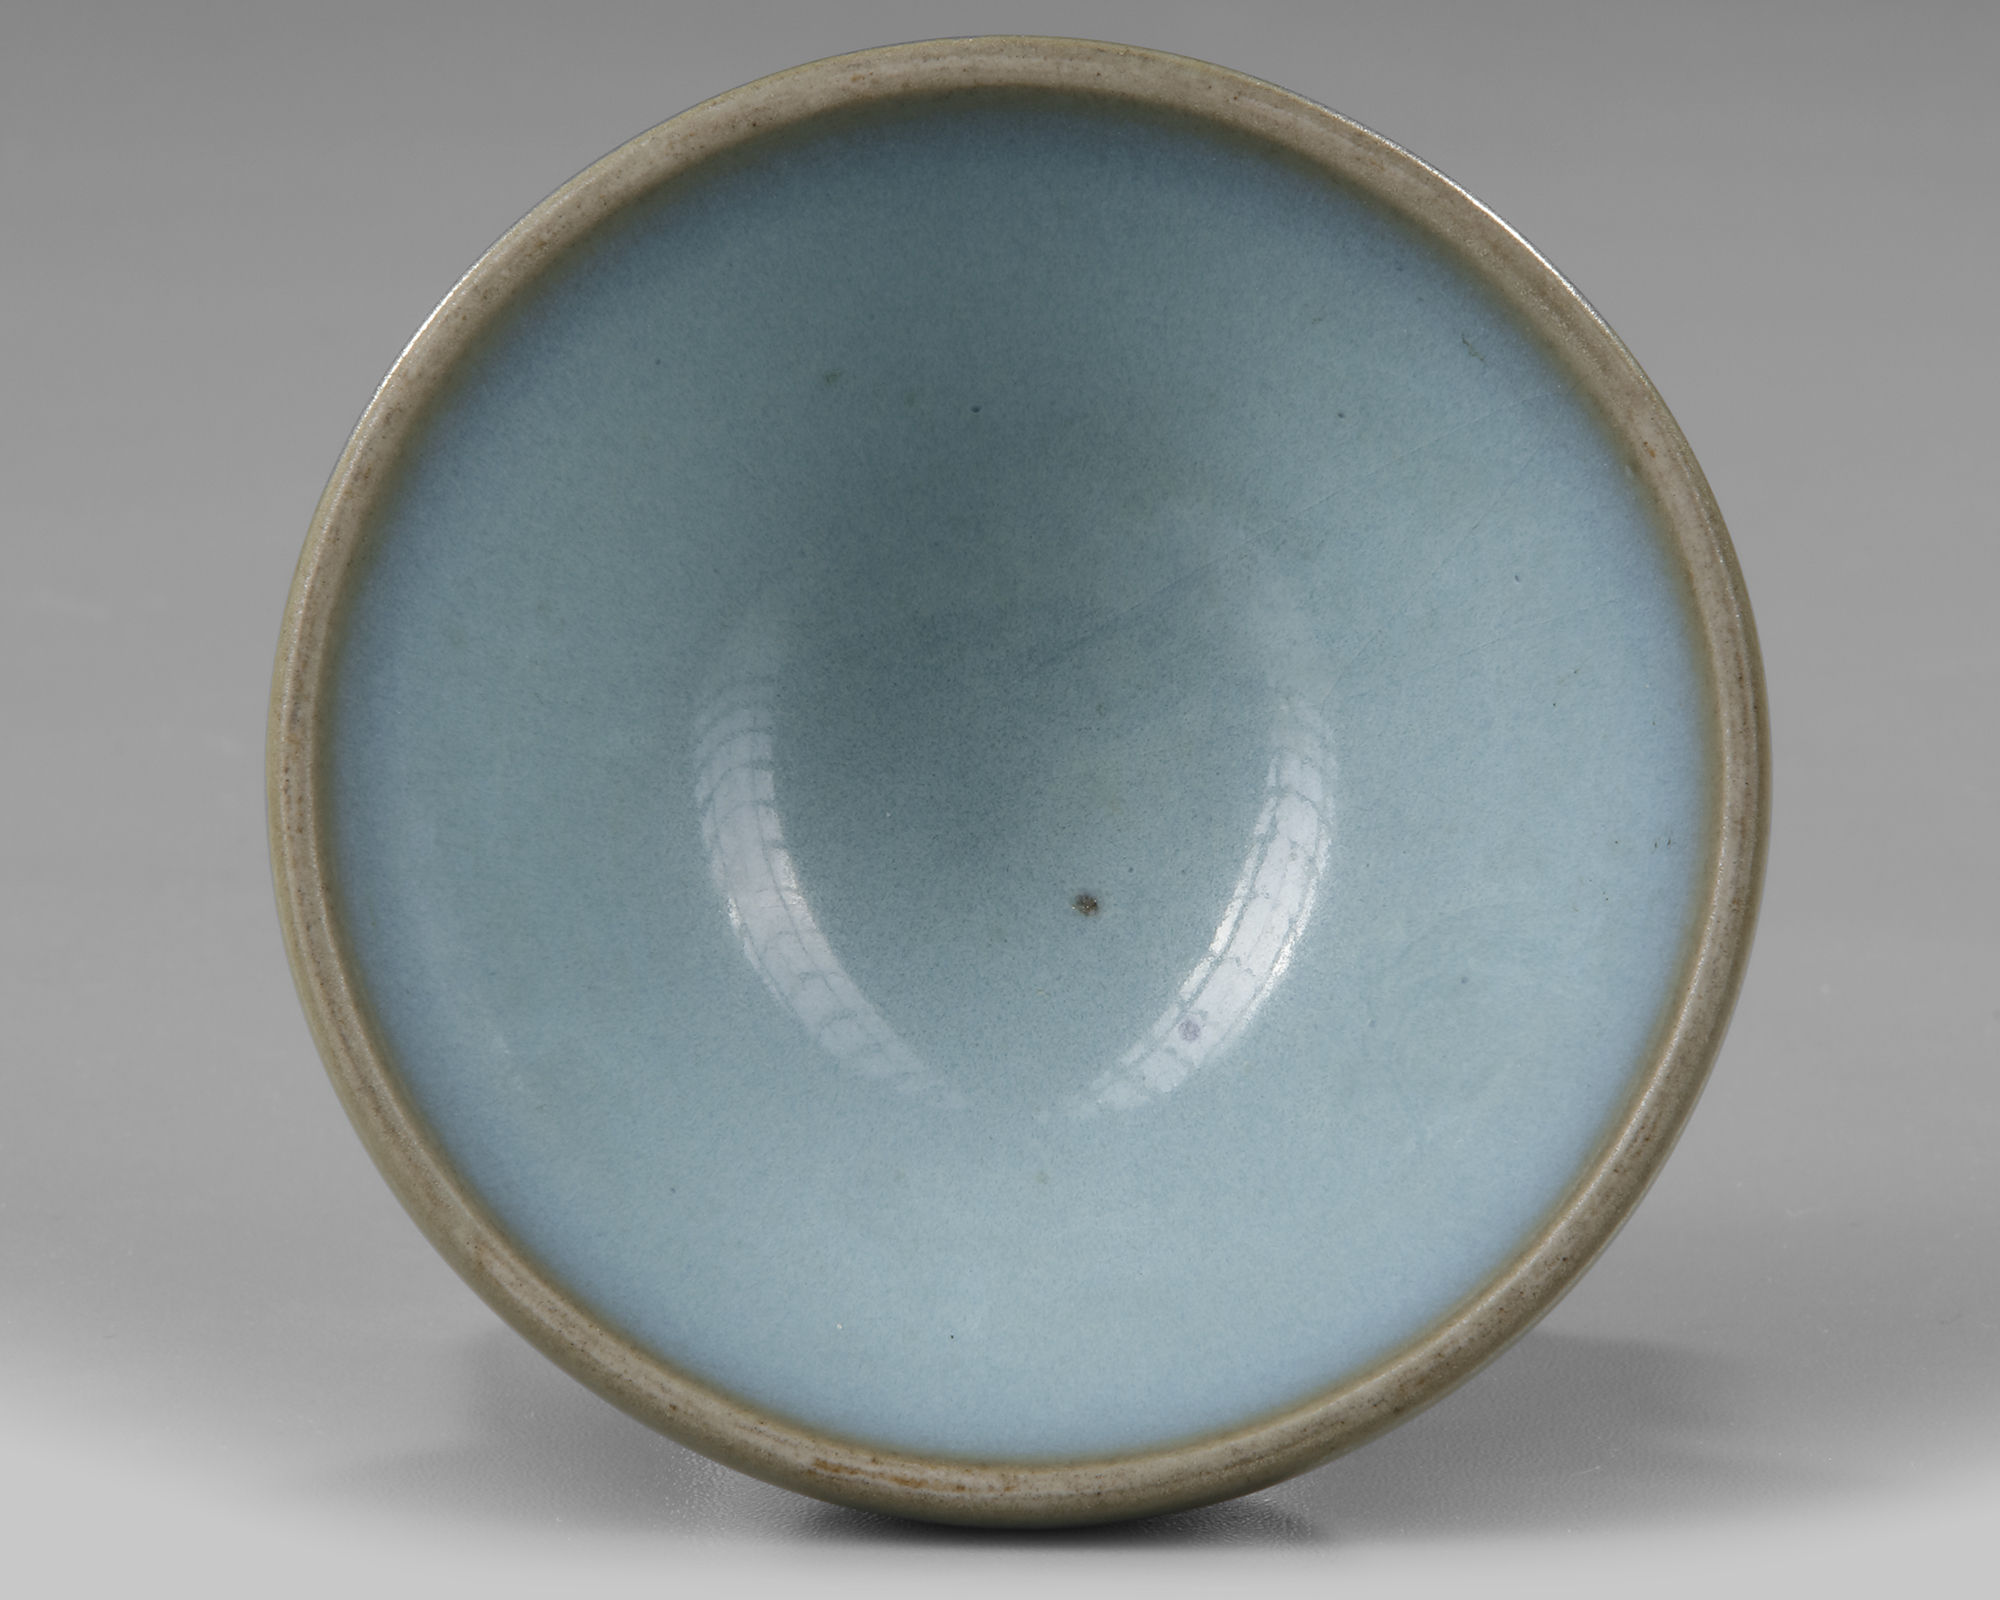 A CHINESE JUNYAO BLUE-GLAZED BOWL, SONG-JIN DYNASTY (11TH-12TH CENTURY) - Image 5 of 5